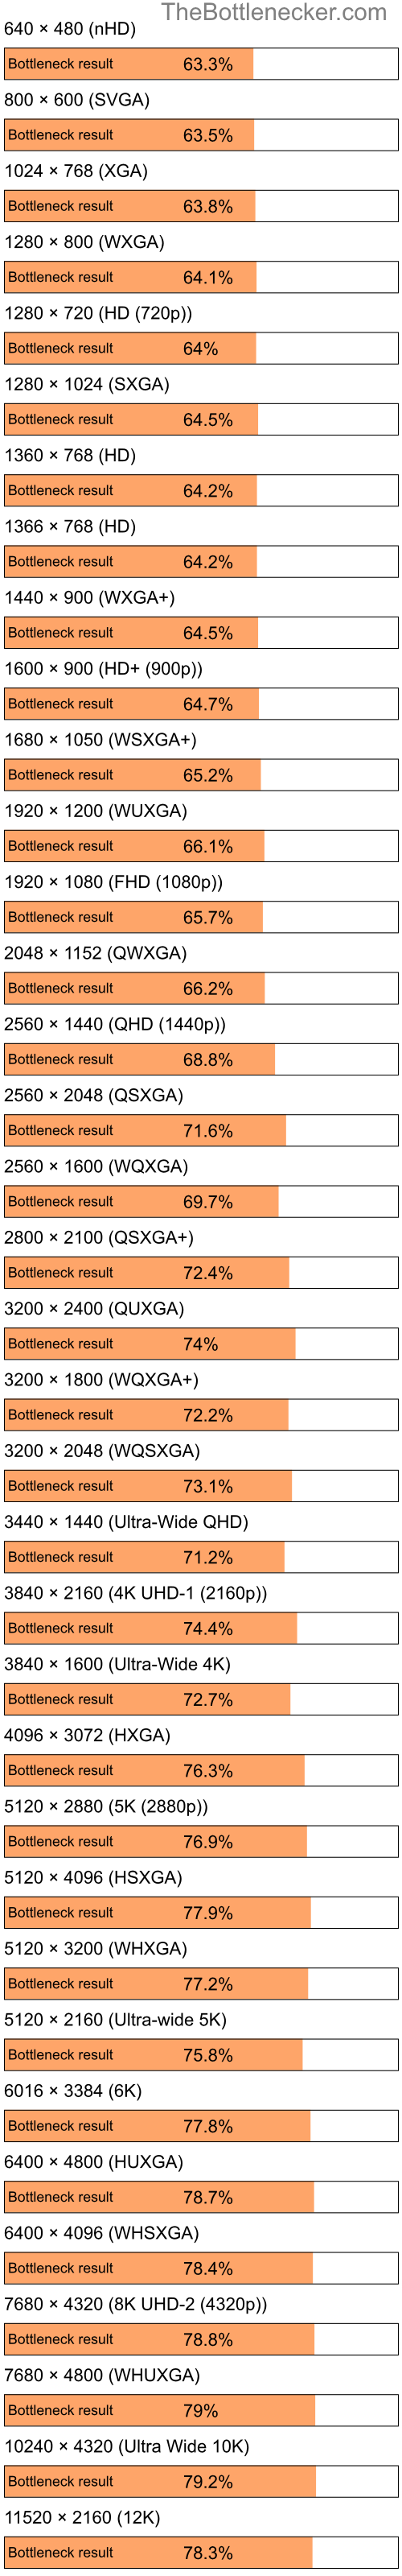 Bottleneck results by resolution for Intel Pentium 4 and AMD Mobility Radeon 4100 in7 Days to Die